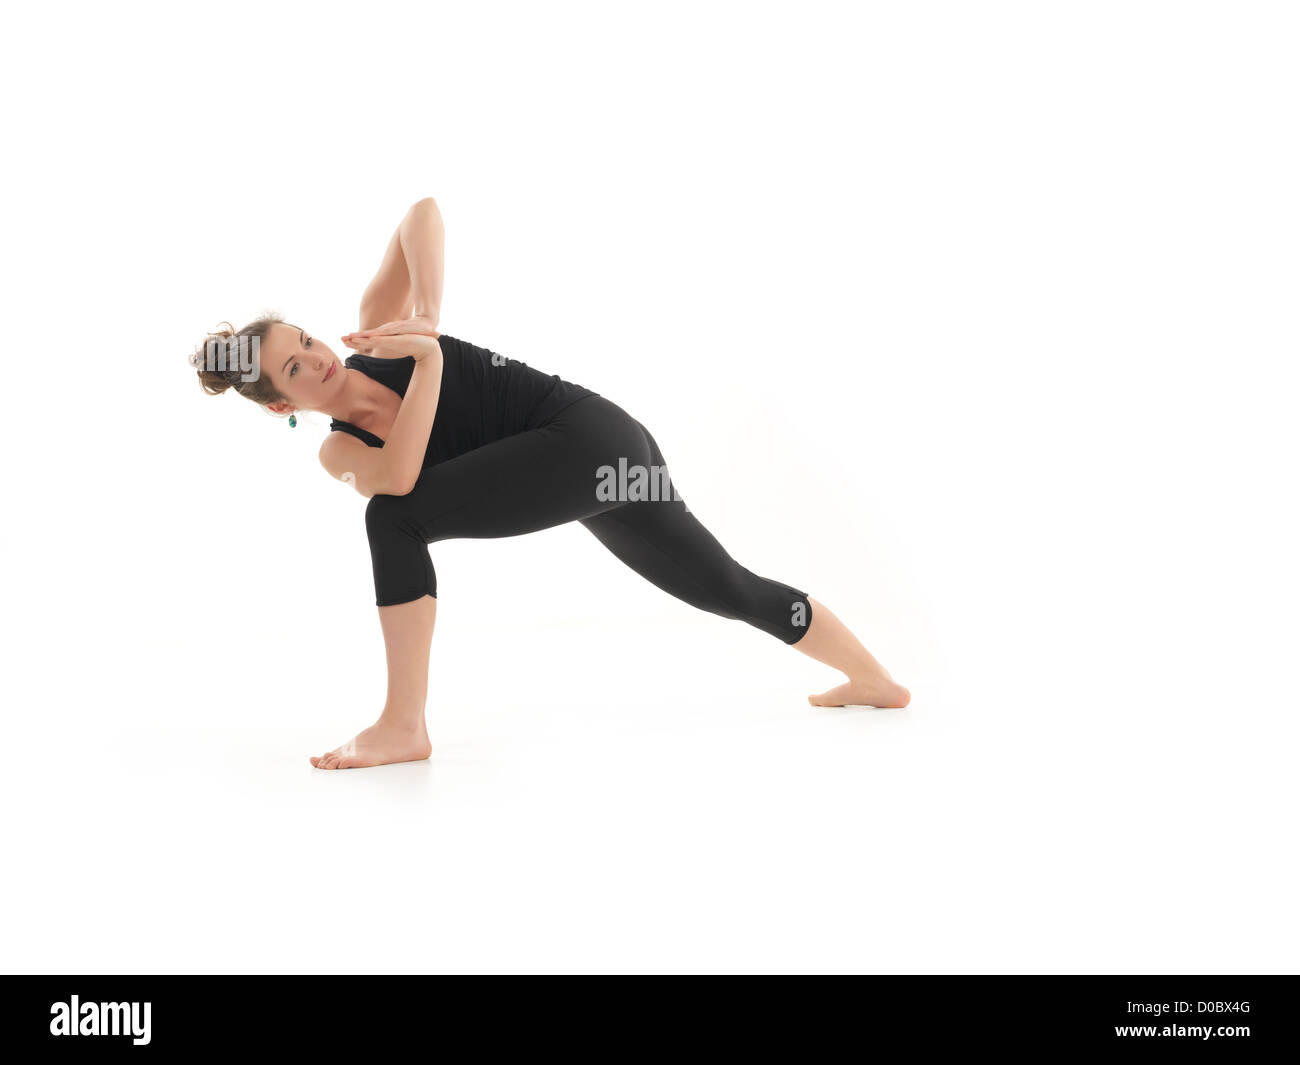 variation of yoga posture demonstrated by young blonde female, dressed in black, on white background Stock Photo